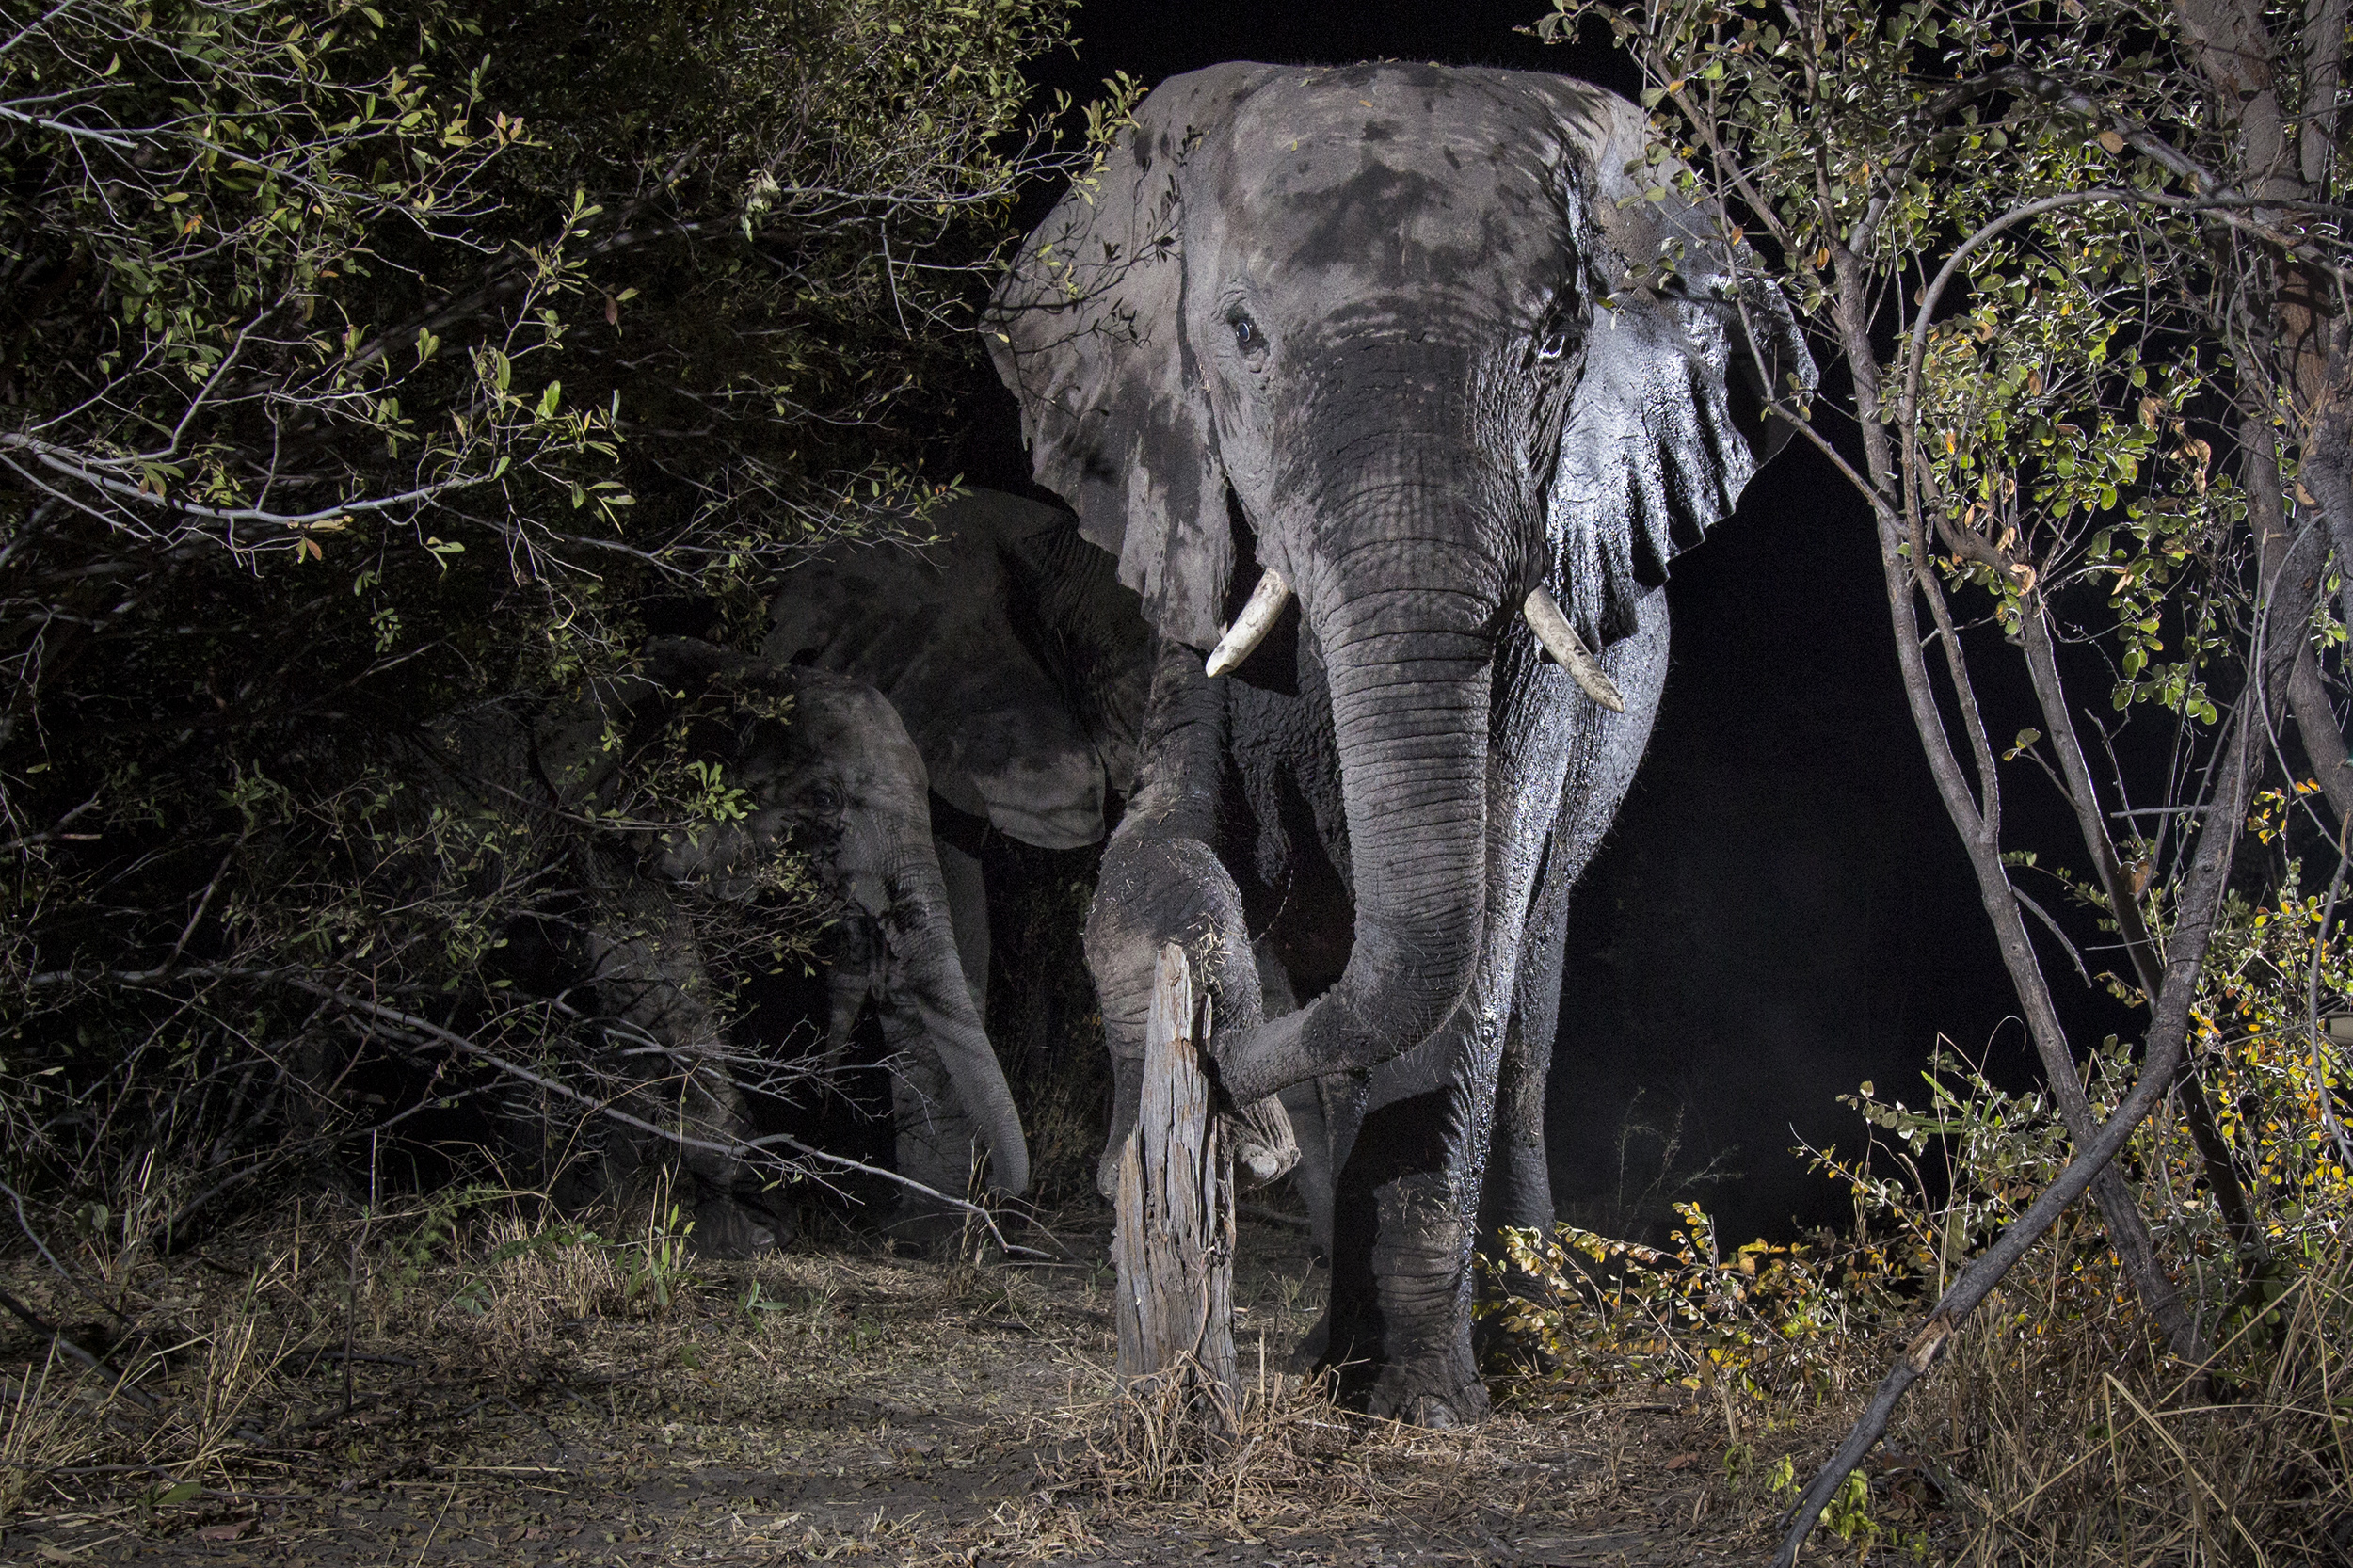 PHOTO: Photographer Will Burrard-Lucas captured unique photos of wildlife in the Namibia region of the Kavango Zambezi Transfrontier Conservation Area, known as KAZA, for the World Wildlife Fund. 